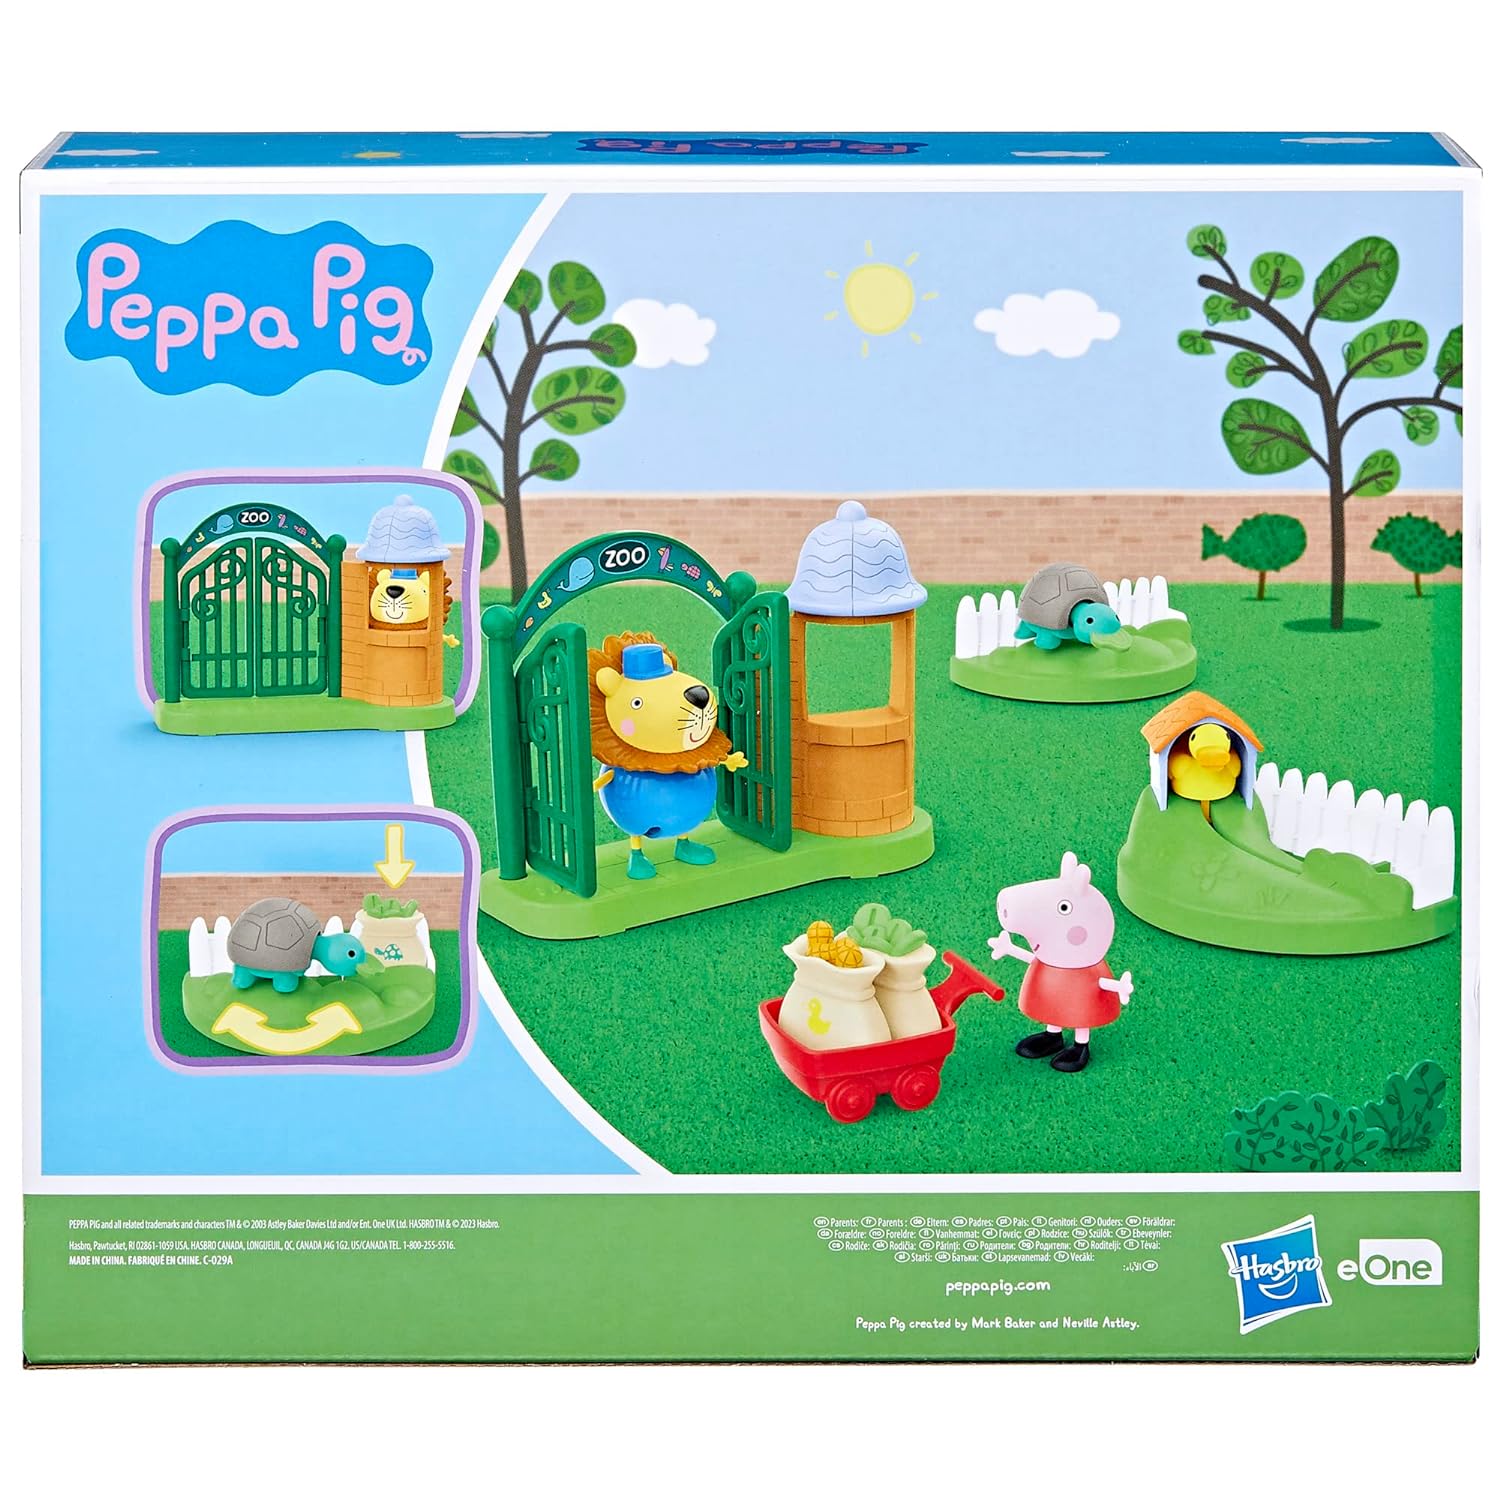 Hasbro Peppa Pig Toys Peppa's Day at The Zoo Playset, 2 Figures and 6 Themed Accessories, 3-Inch Scale Preschool Toy for Kids Ages…